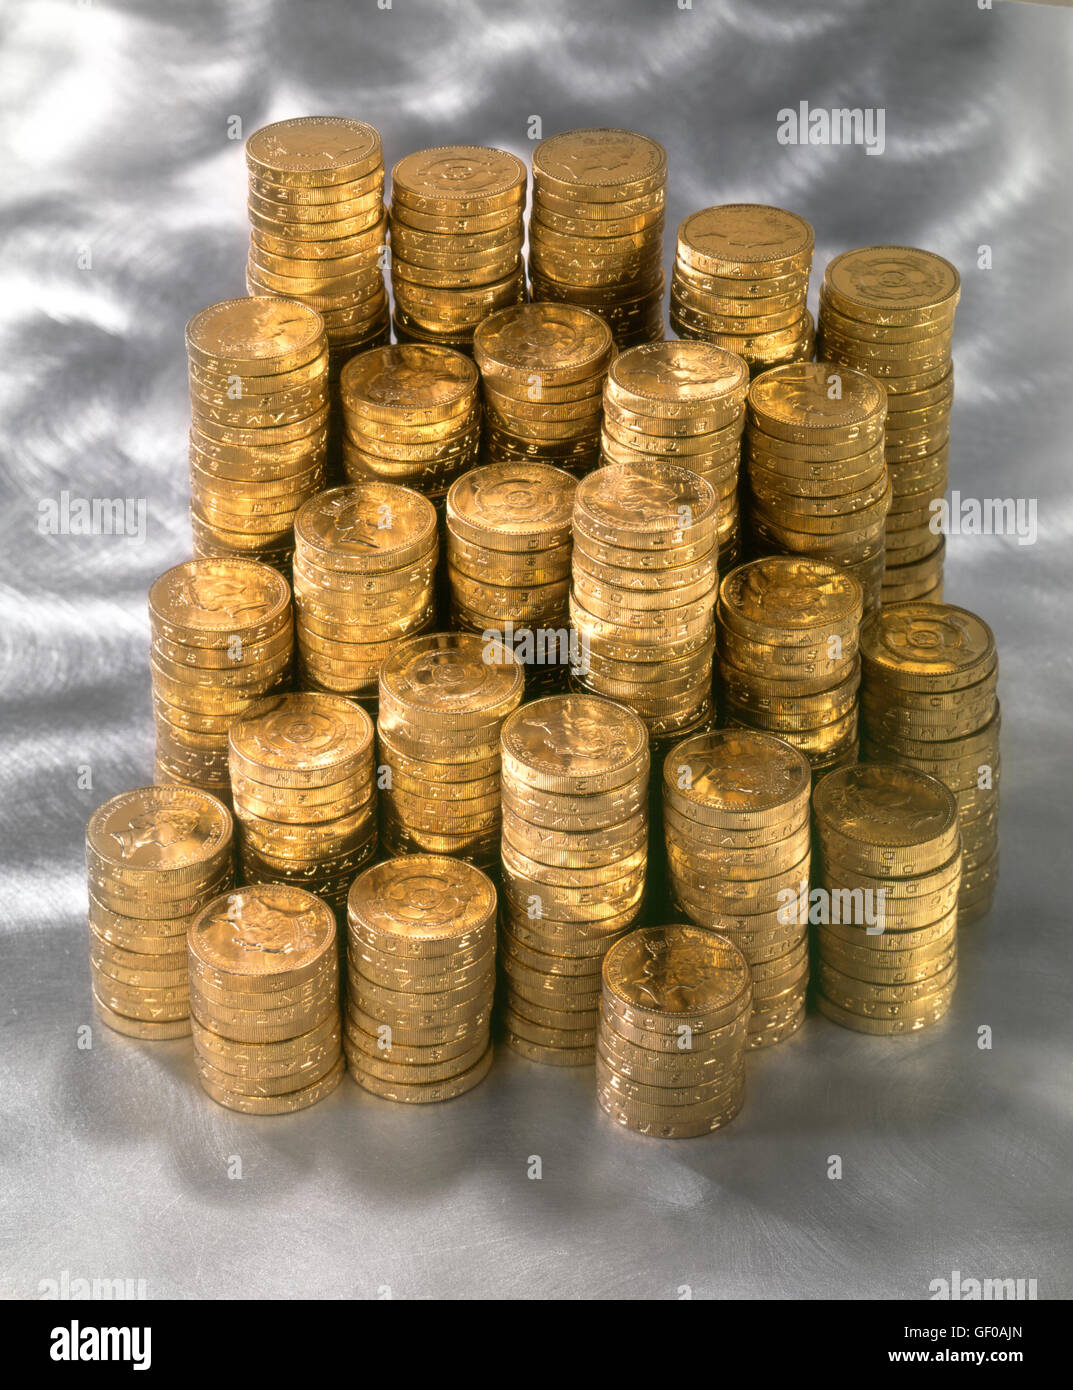 British pound coins sterling Stock Photo